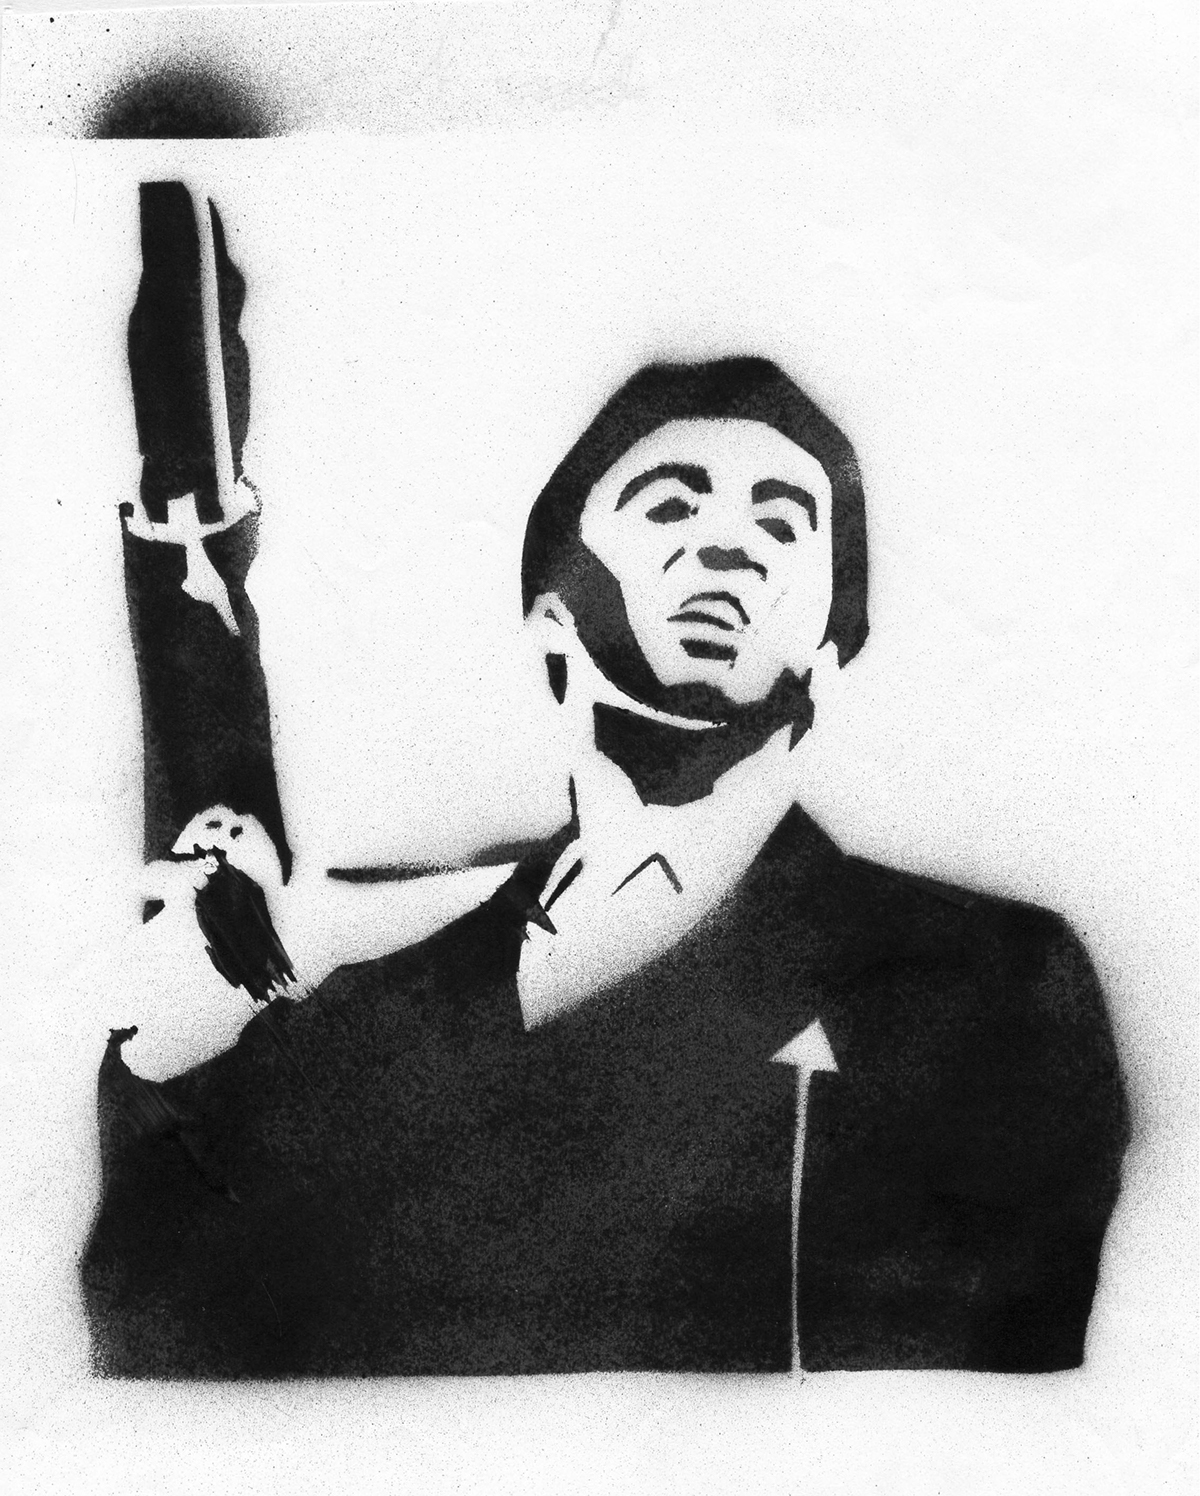 Monjur alam stencil art malcolm x scarface Tony Montana al pacino james bond sean connery Mohammed Ali the greatest Andy Warhol banksy The Godfather